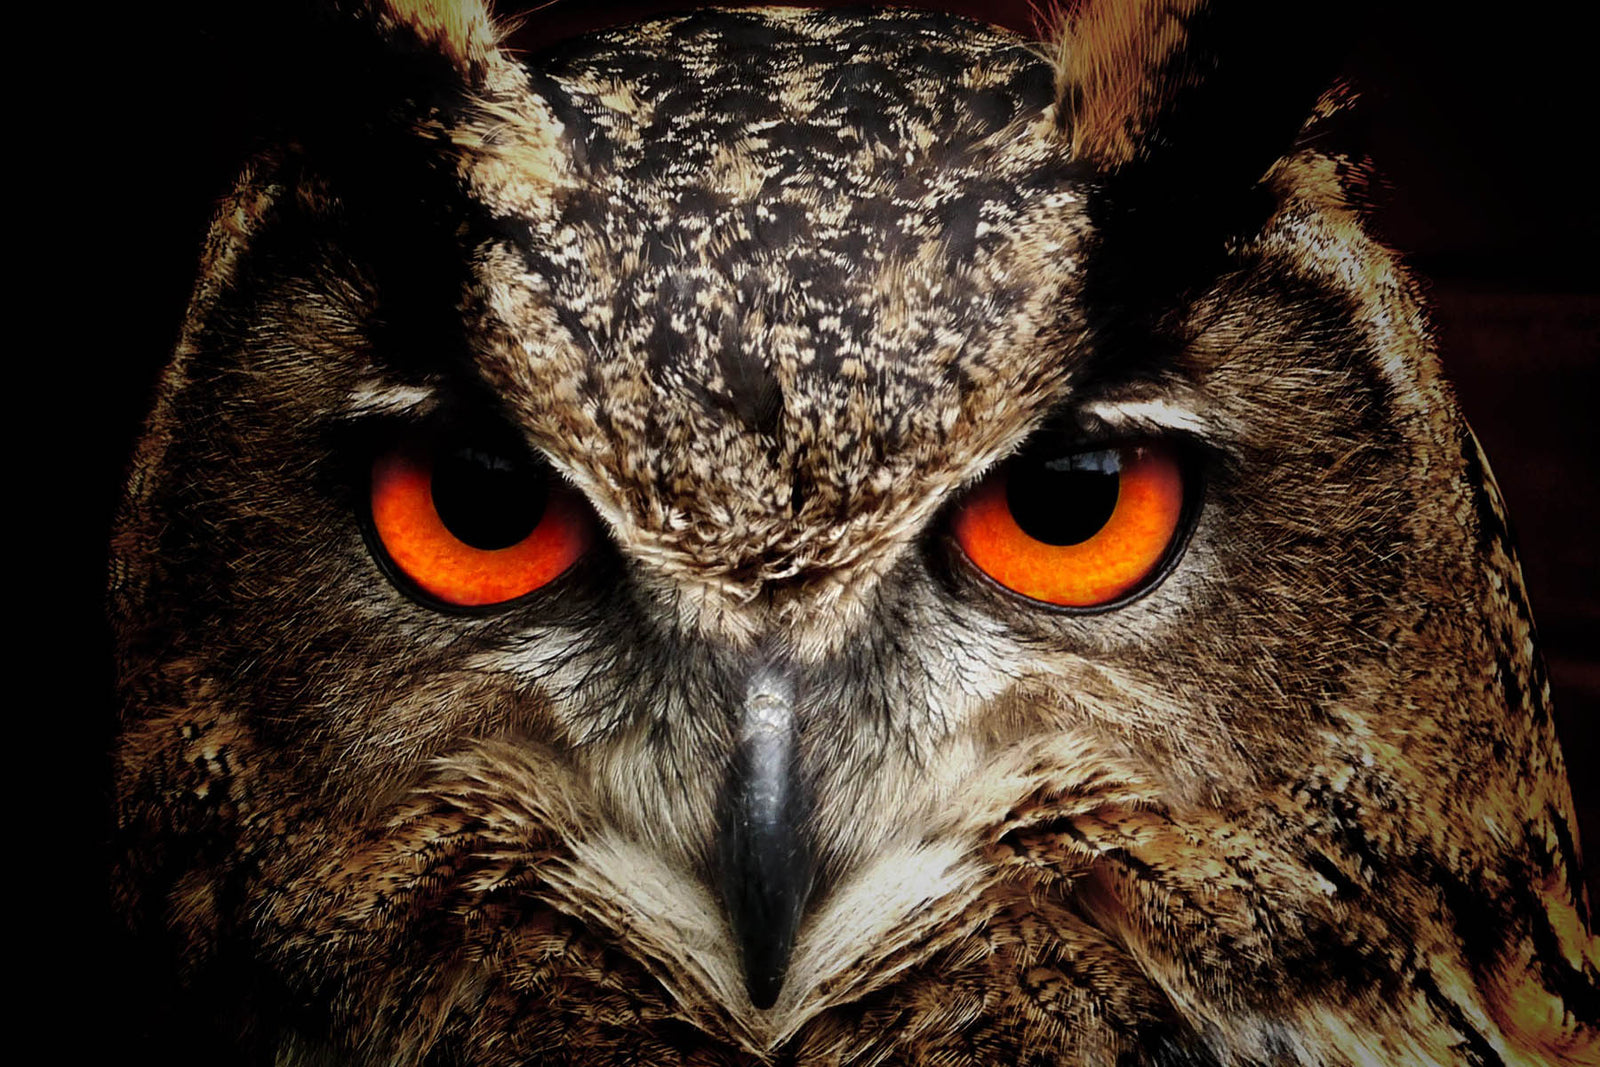 Spirit Animals: Is the Owl Your Animal Guide?